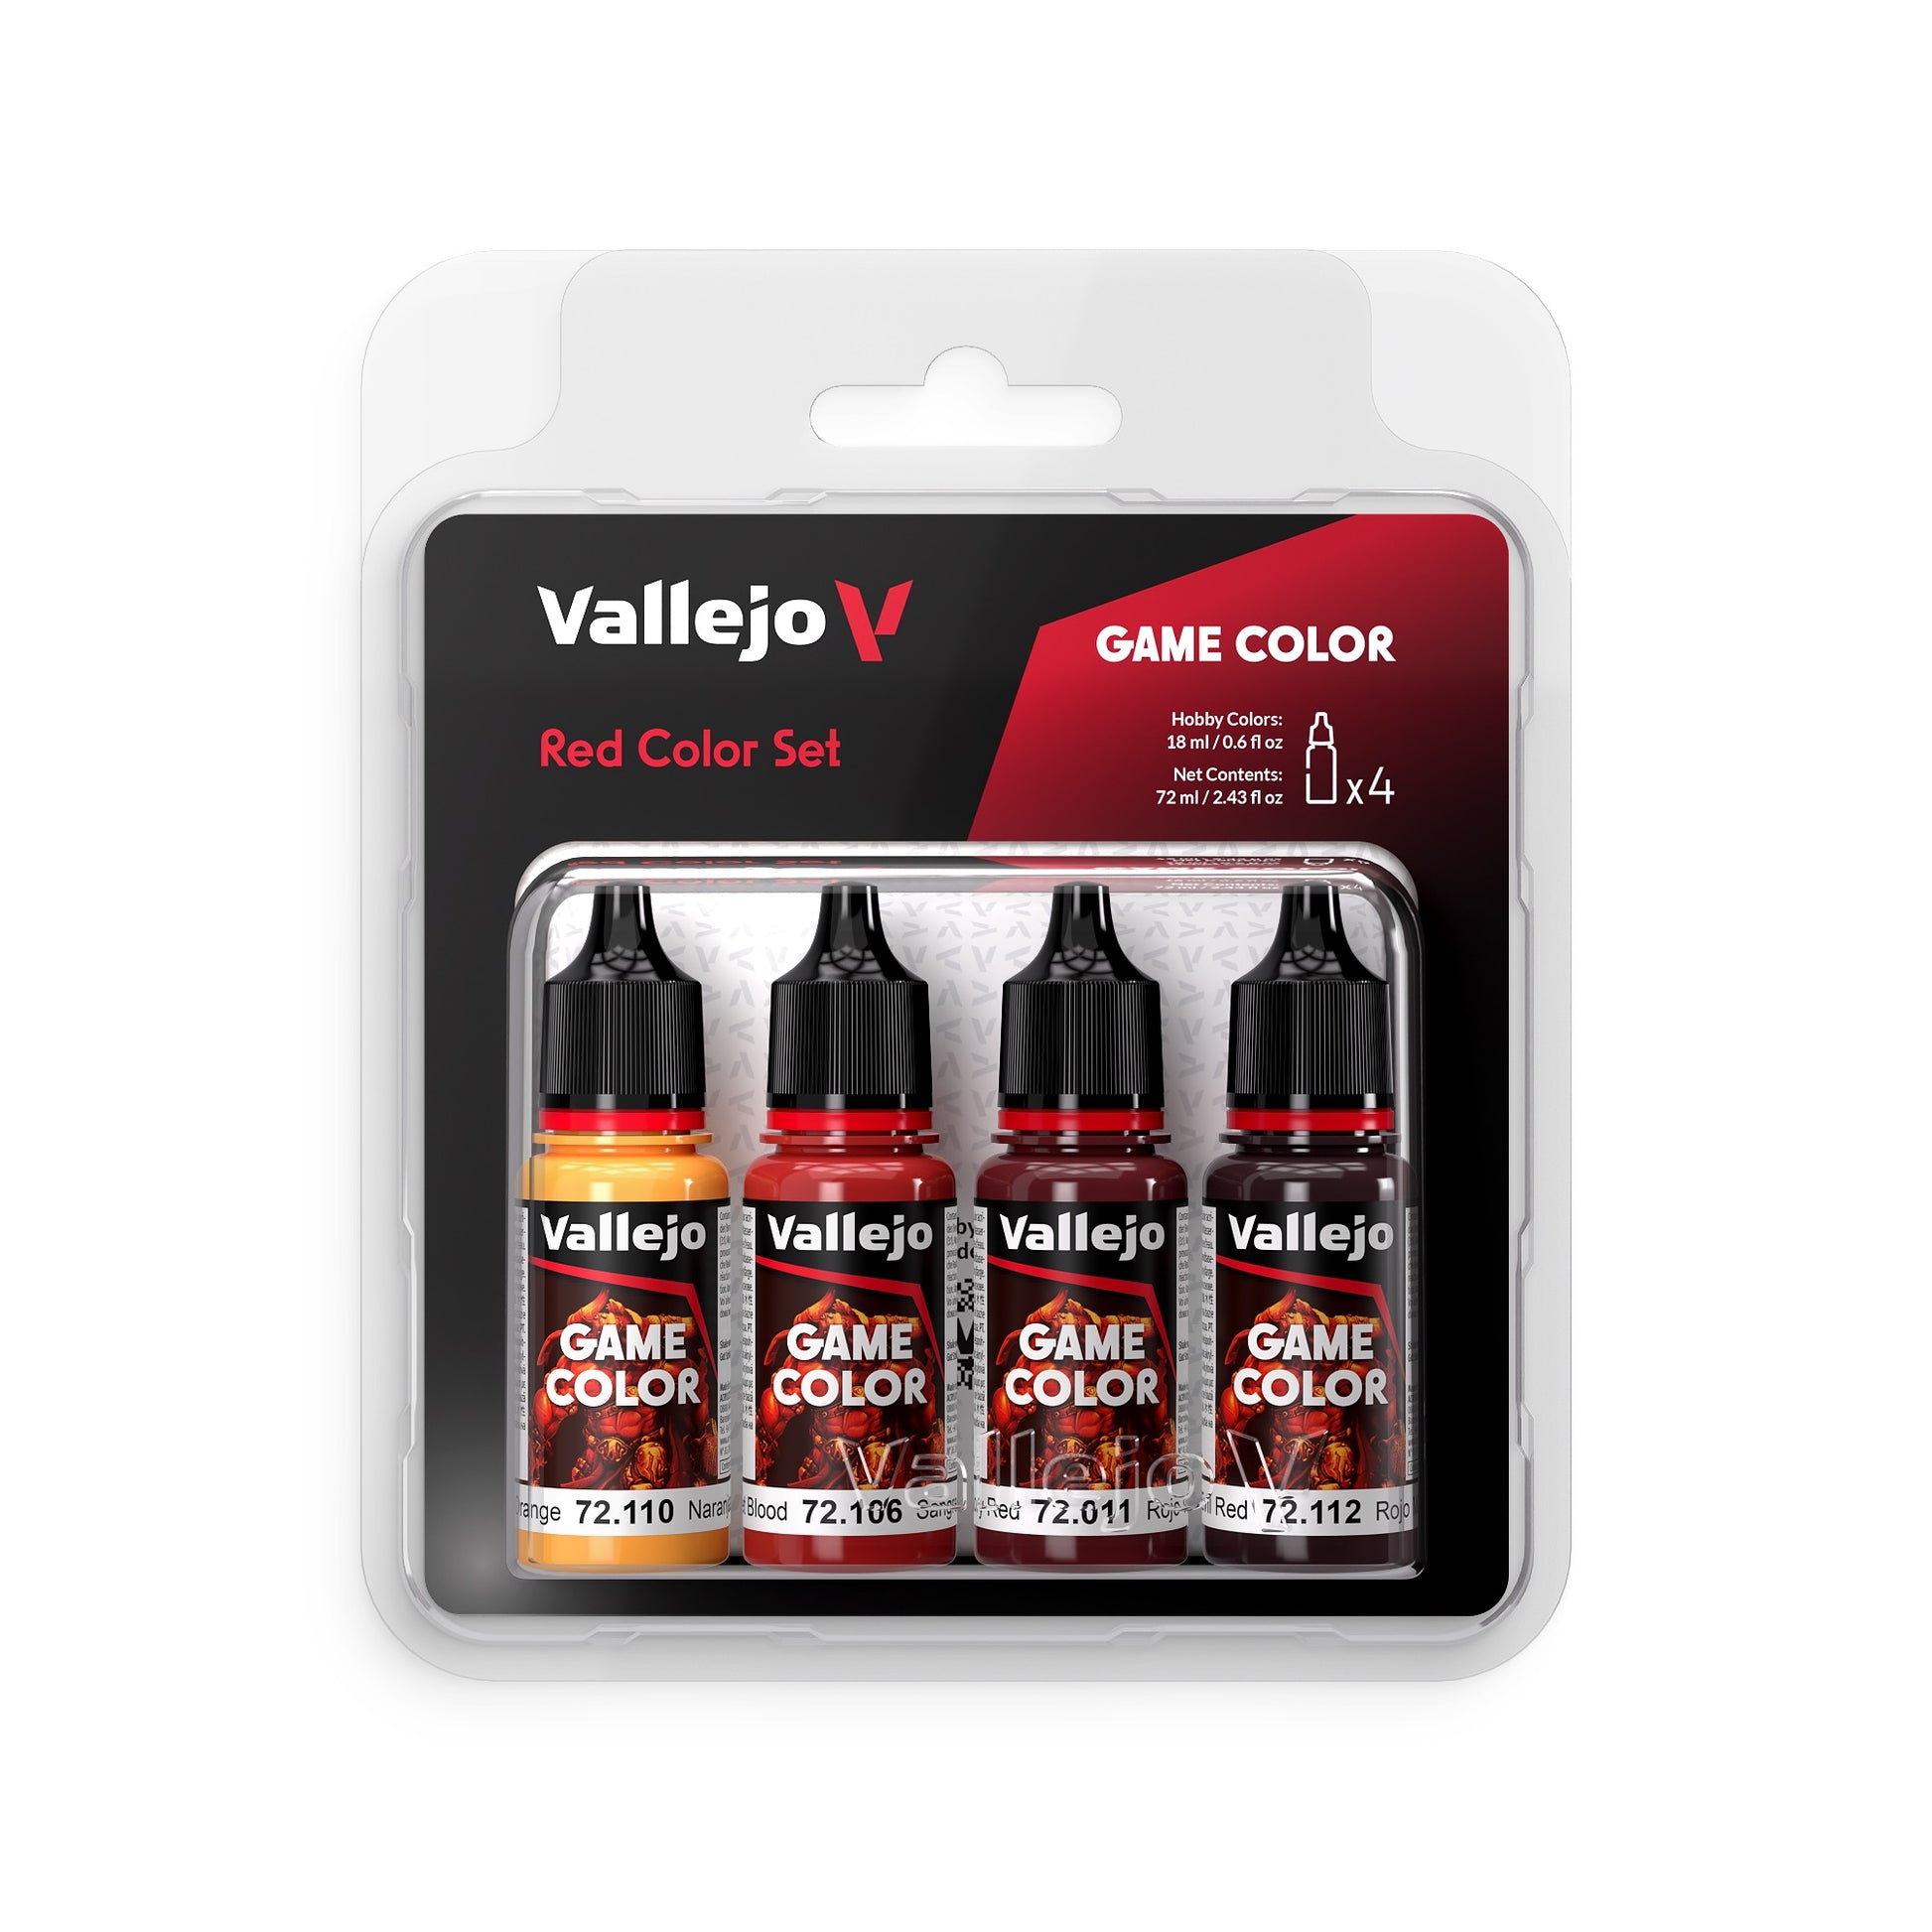 Vallejo Game Colour - Red Color Set